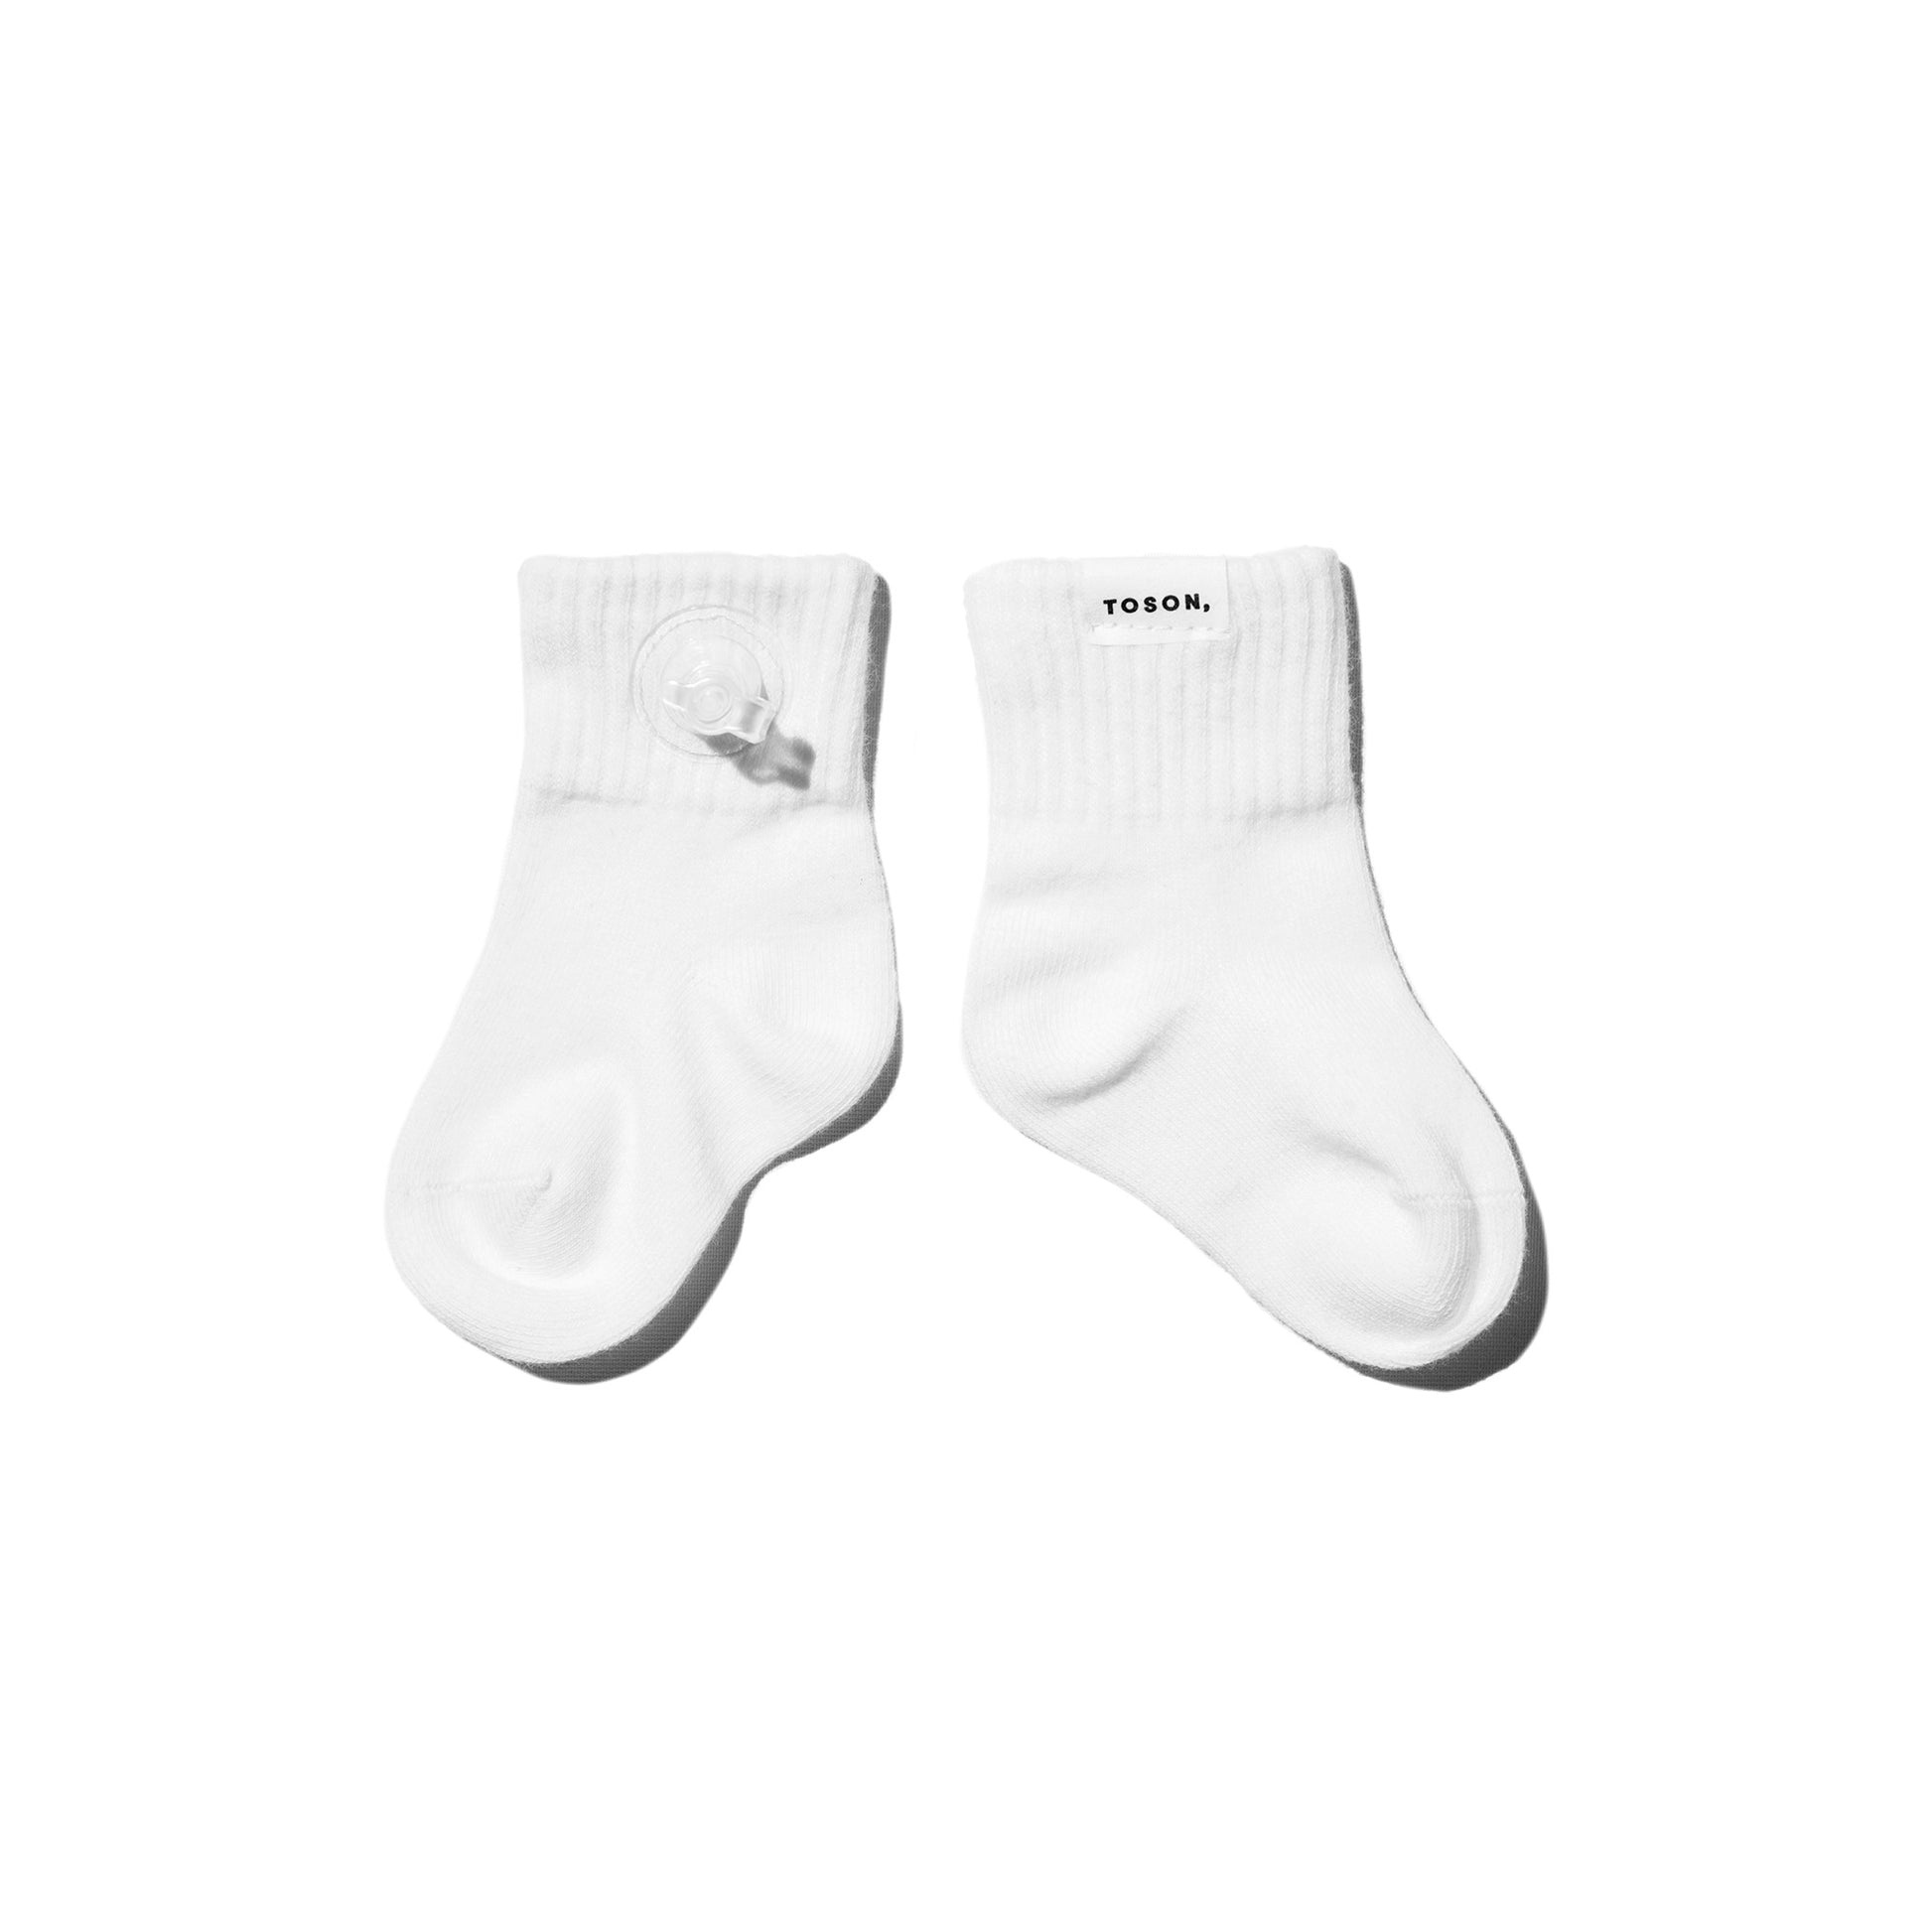 Toson, Baby Inflatable Socks 2 Pack in White